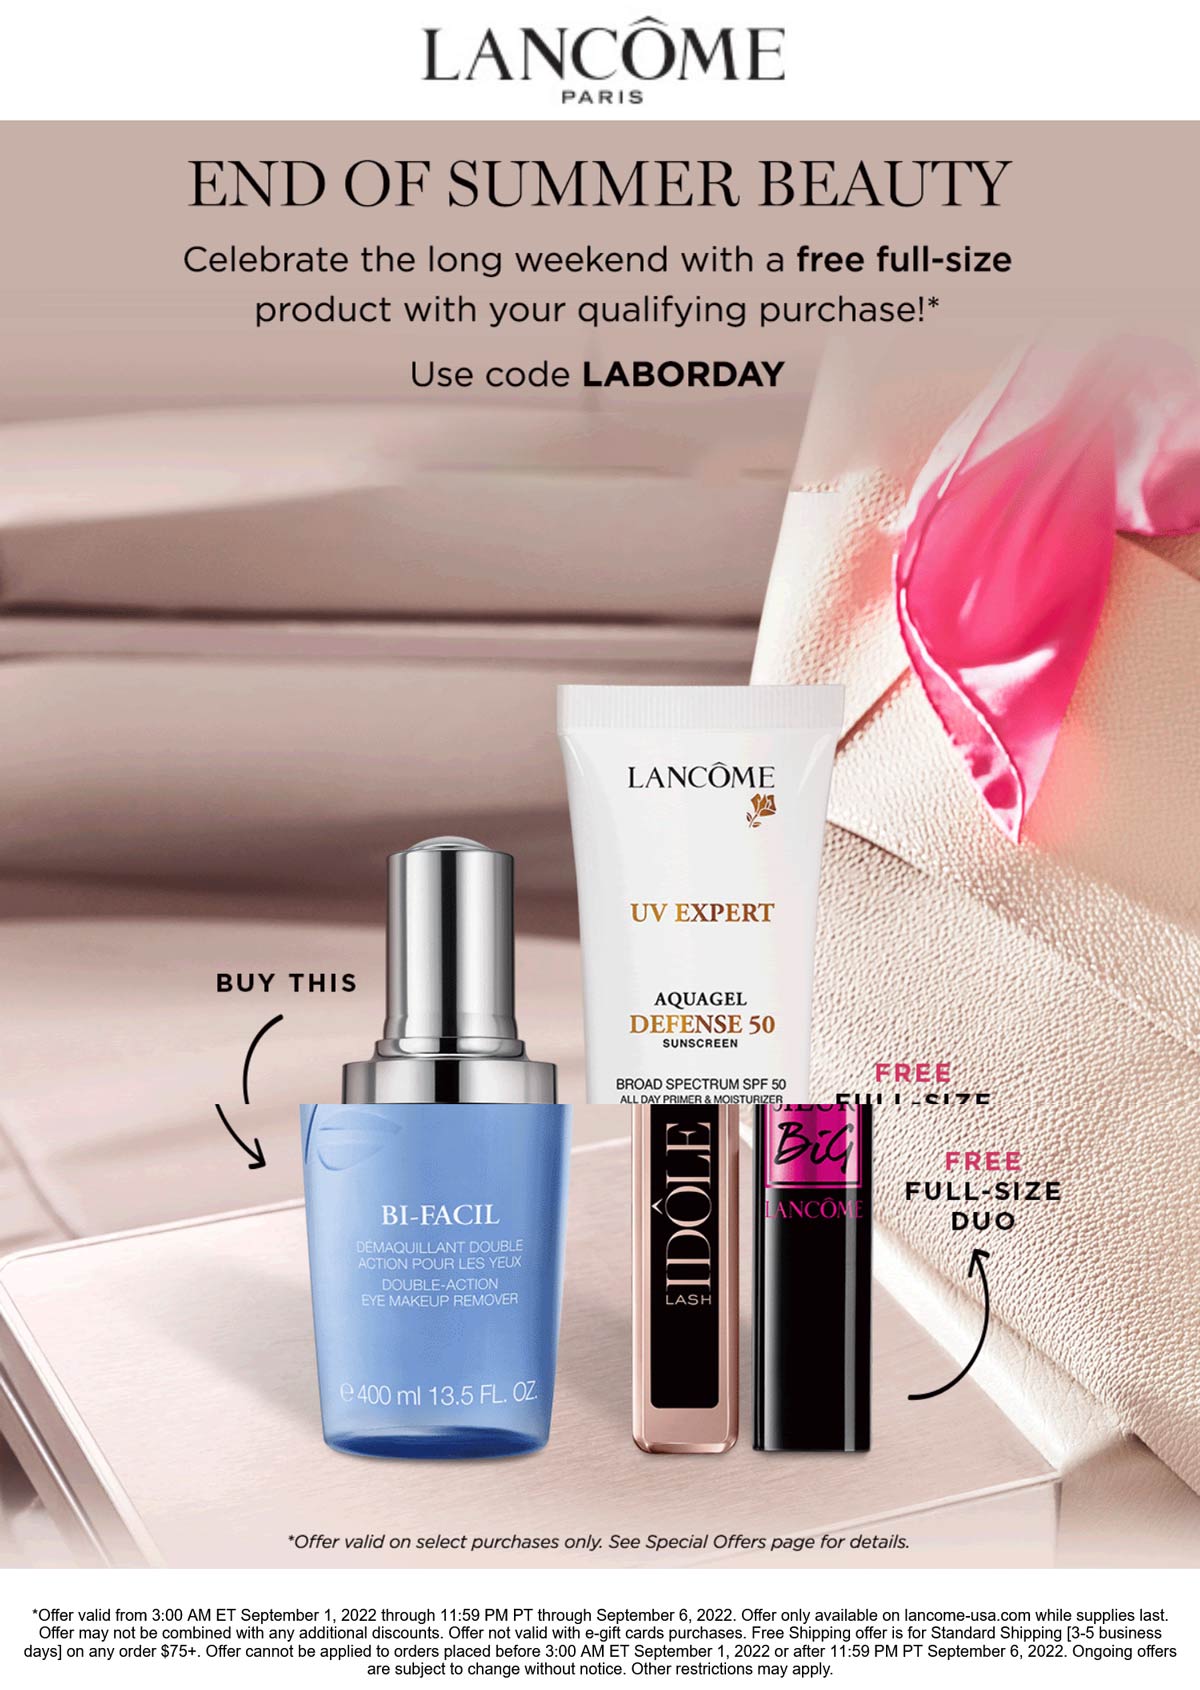 Lancome stores Coupon  Various free full-size items with purchase at Lancome cosmetics via promo code LABORDAY #lancome 